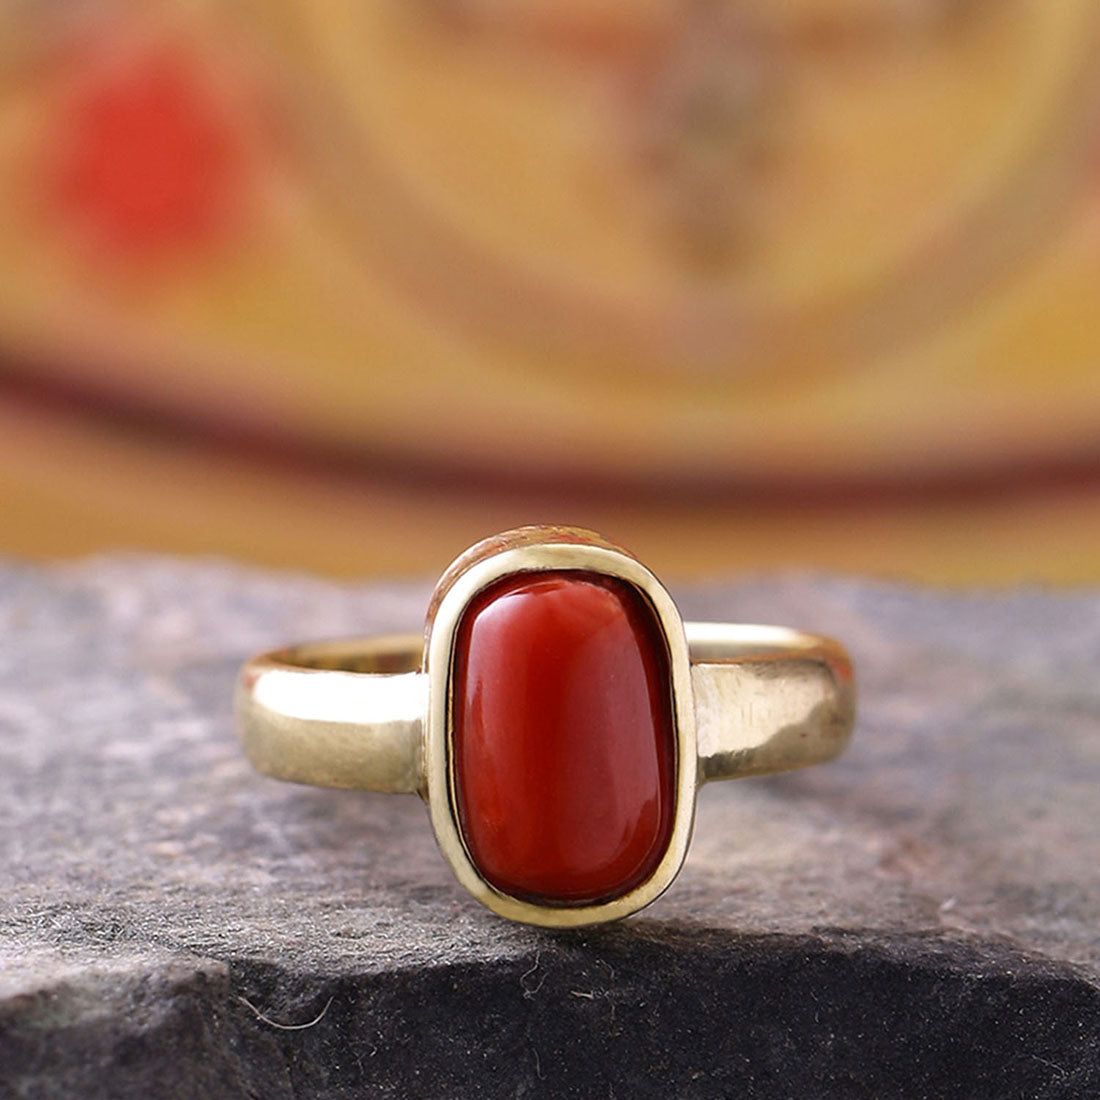 Coral Ring Men, Red Coral Ring Gemstone Ring, Handmade Authentic Red Coral  925 Sterling Silver Genuine Stone Men Ring Size 10, Gift for Him - Etsy